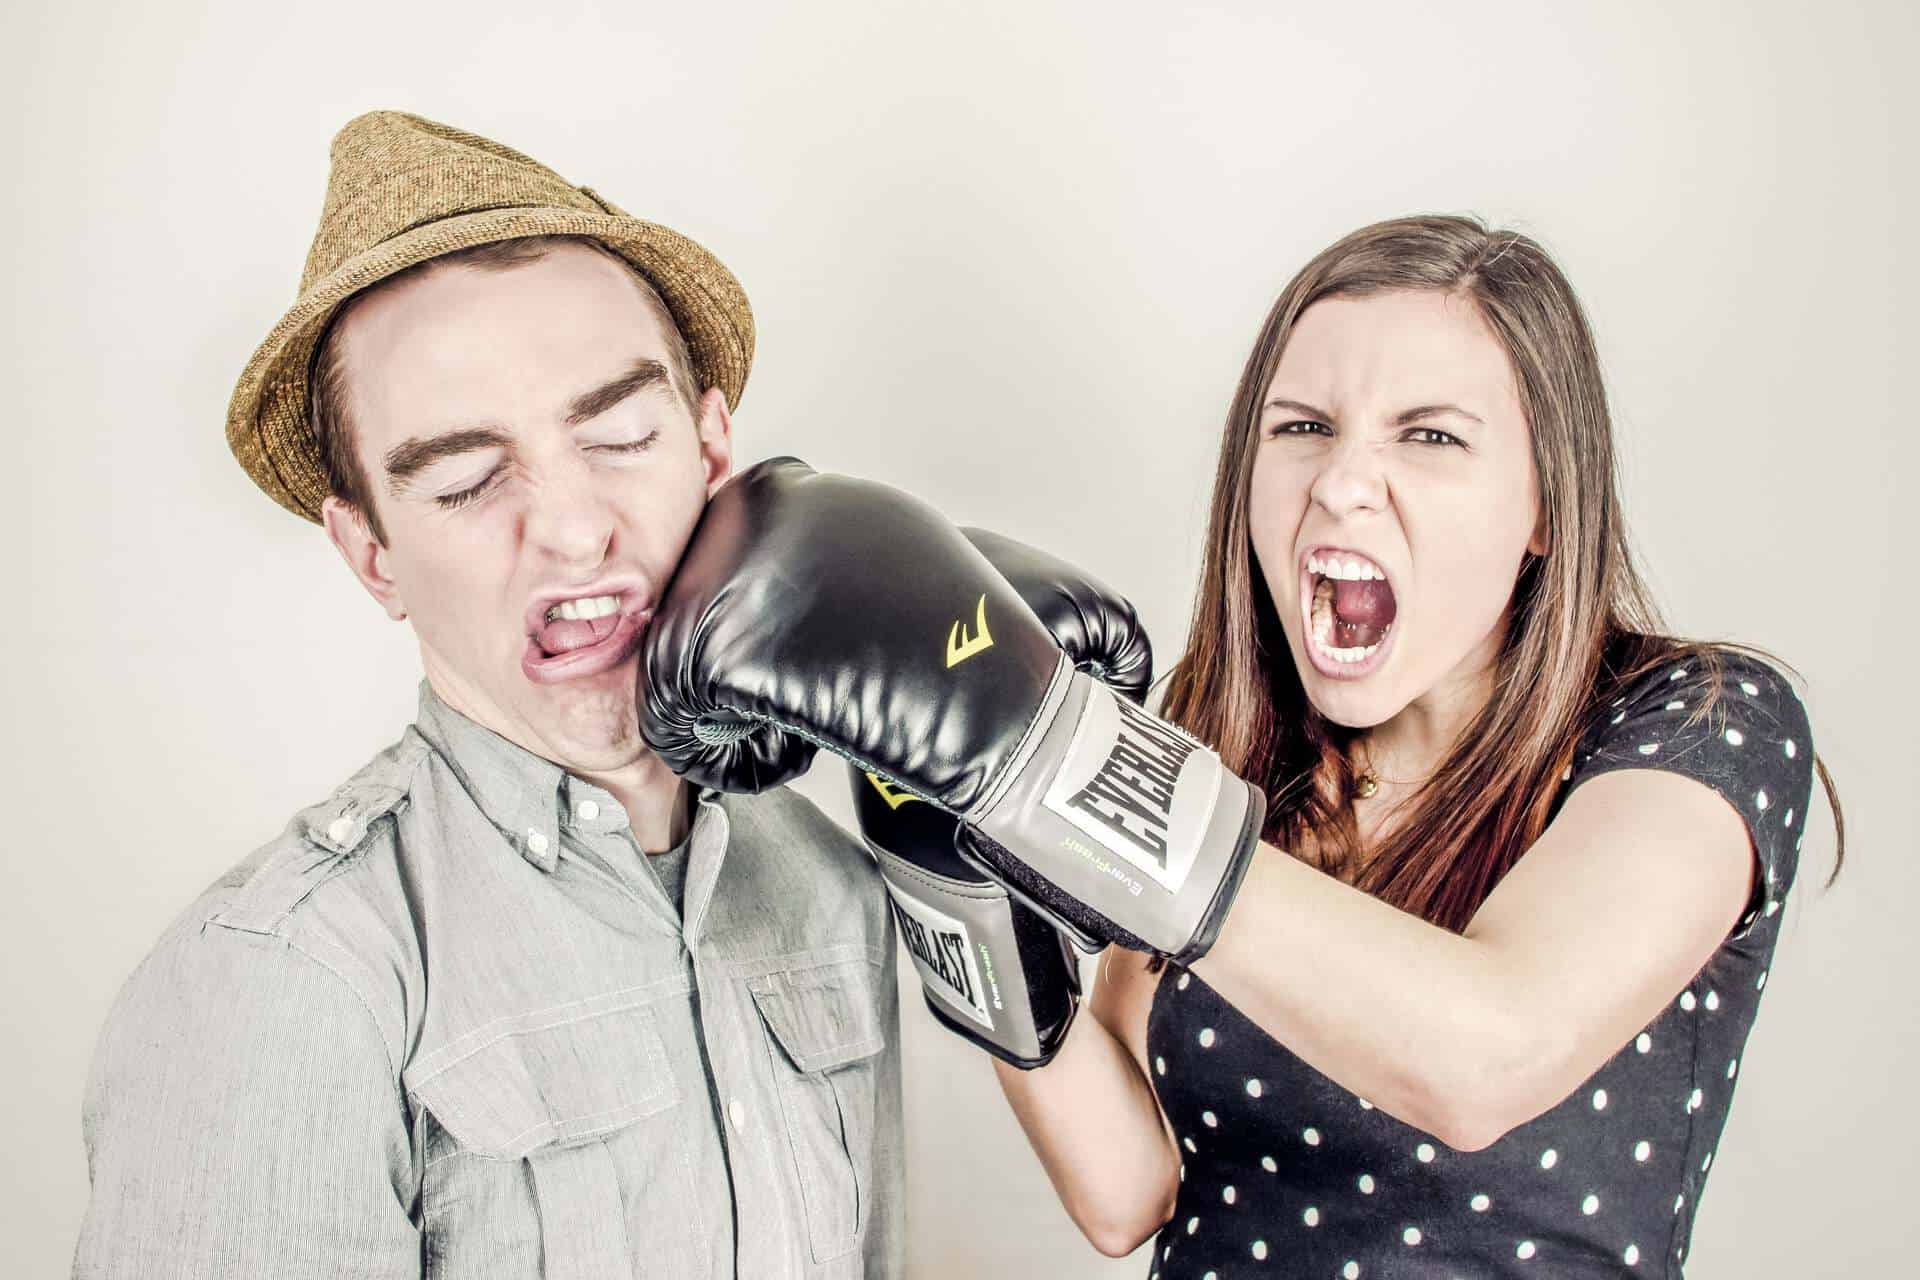 Girl punching guy while wearing boxing gloves, confrontation between the two.